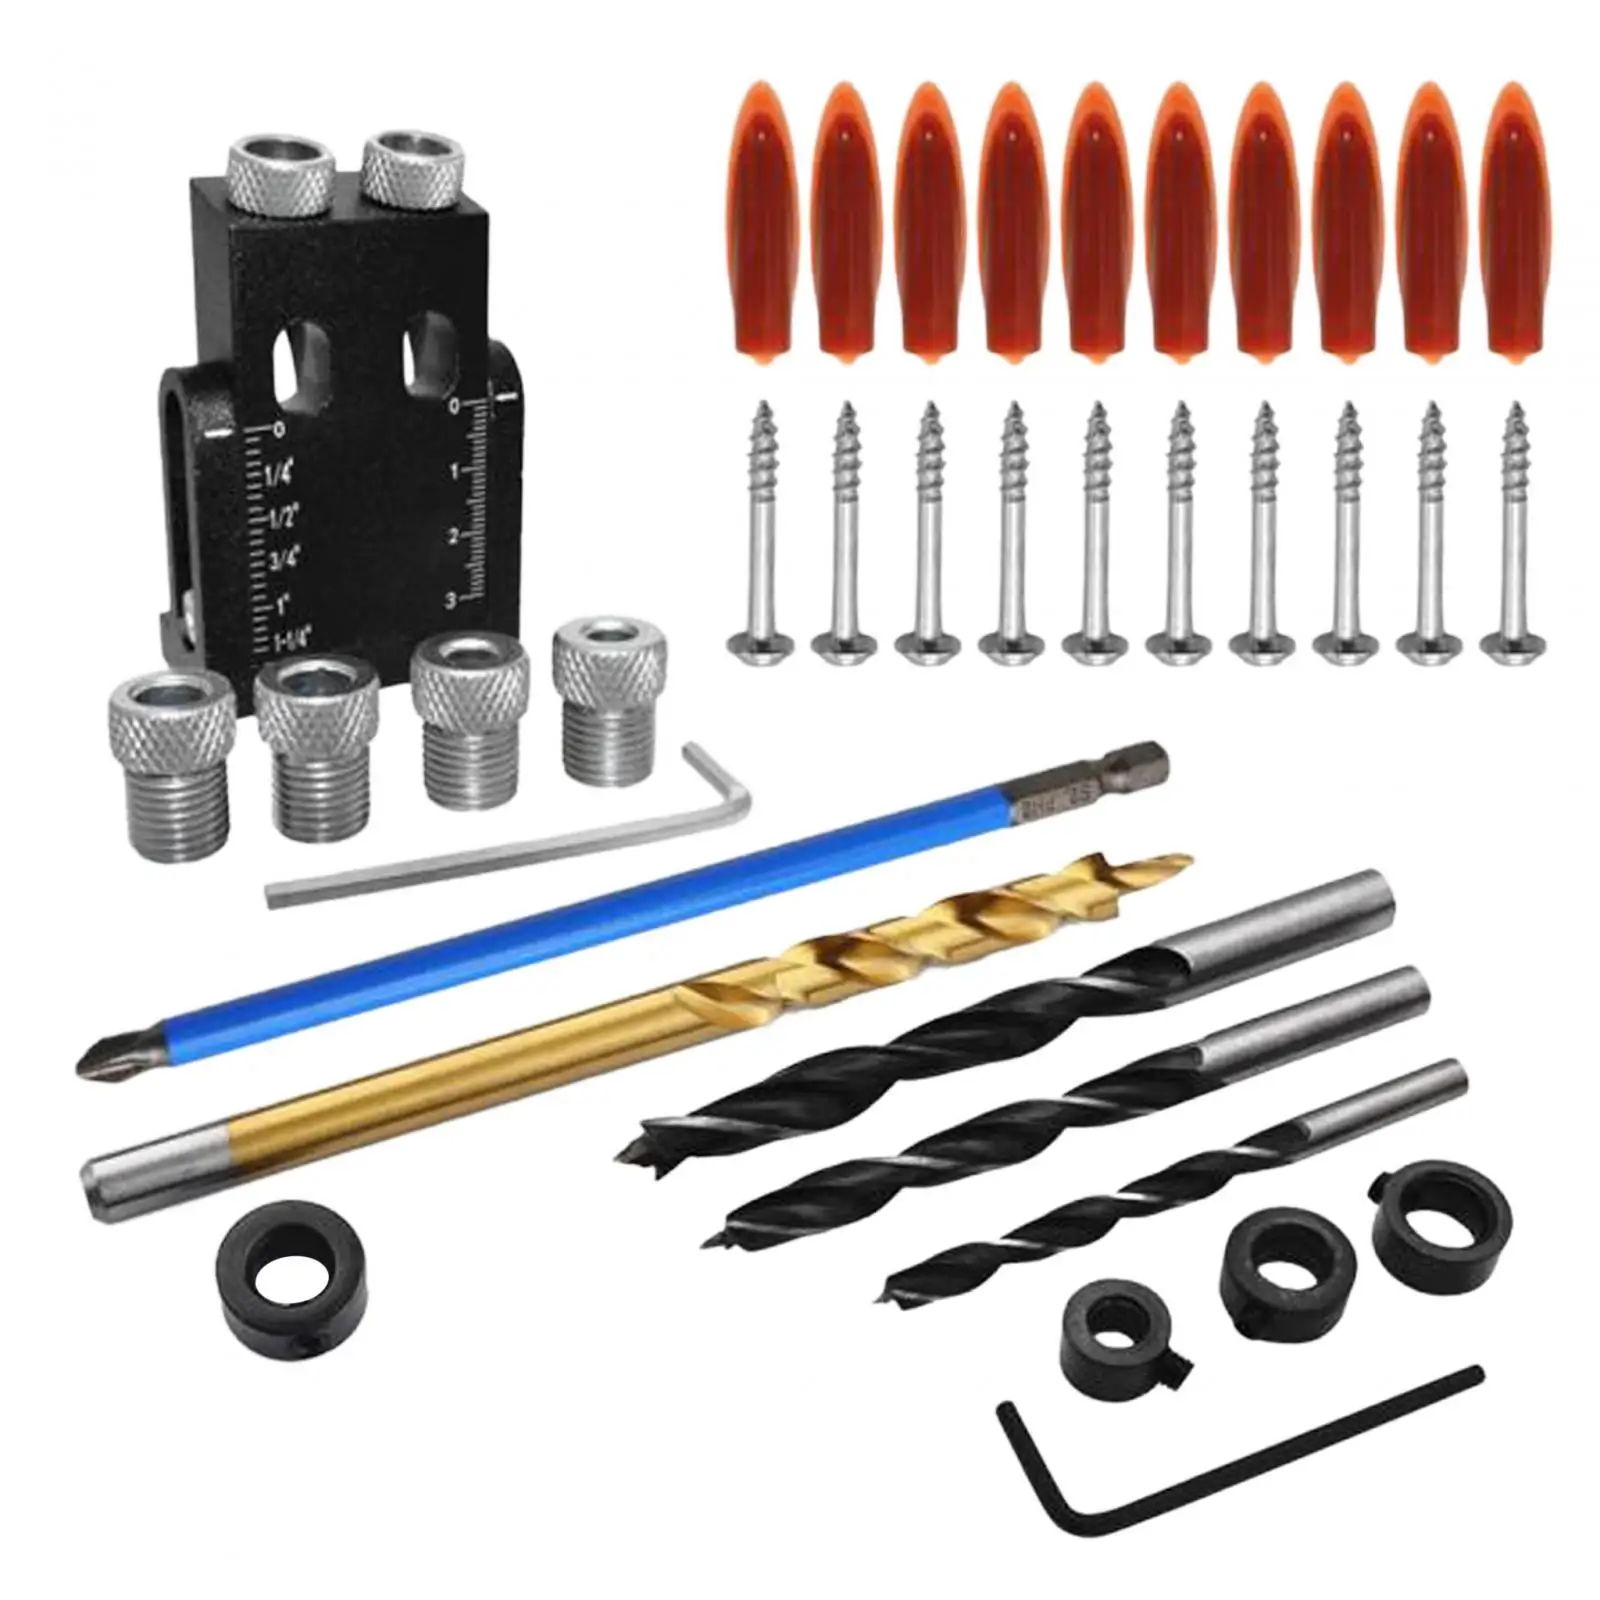 

Hole Drilling Guides Pocket Hole Jig Kit Jig Drill Bit Kit for Horizontal Cable Wood Post Deck Railing Tight Space Wooden Dowel